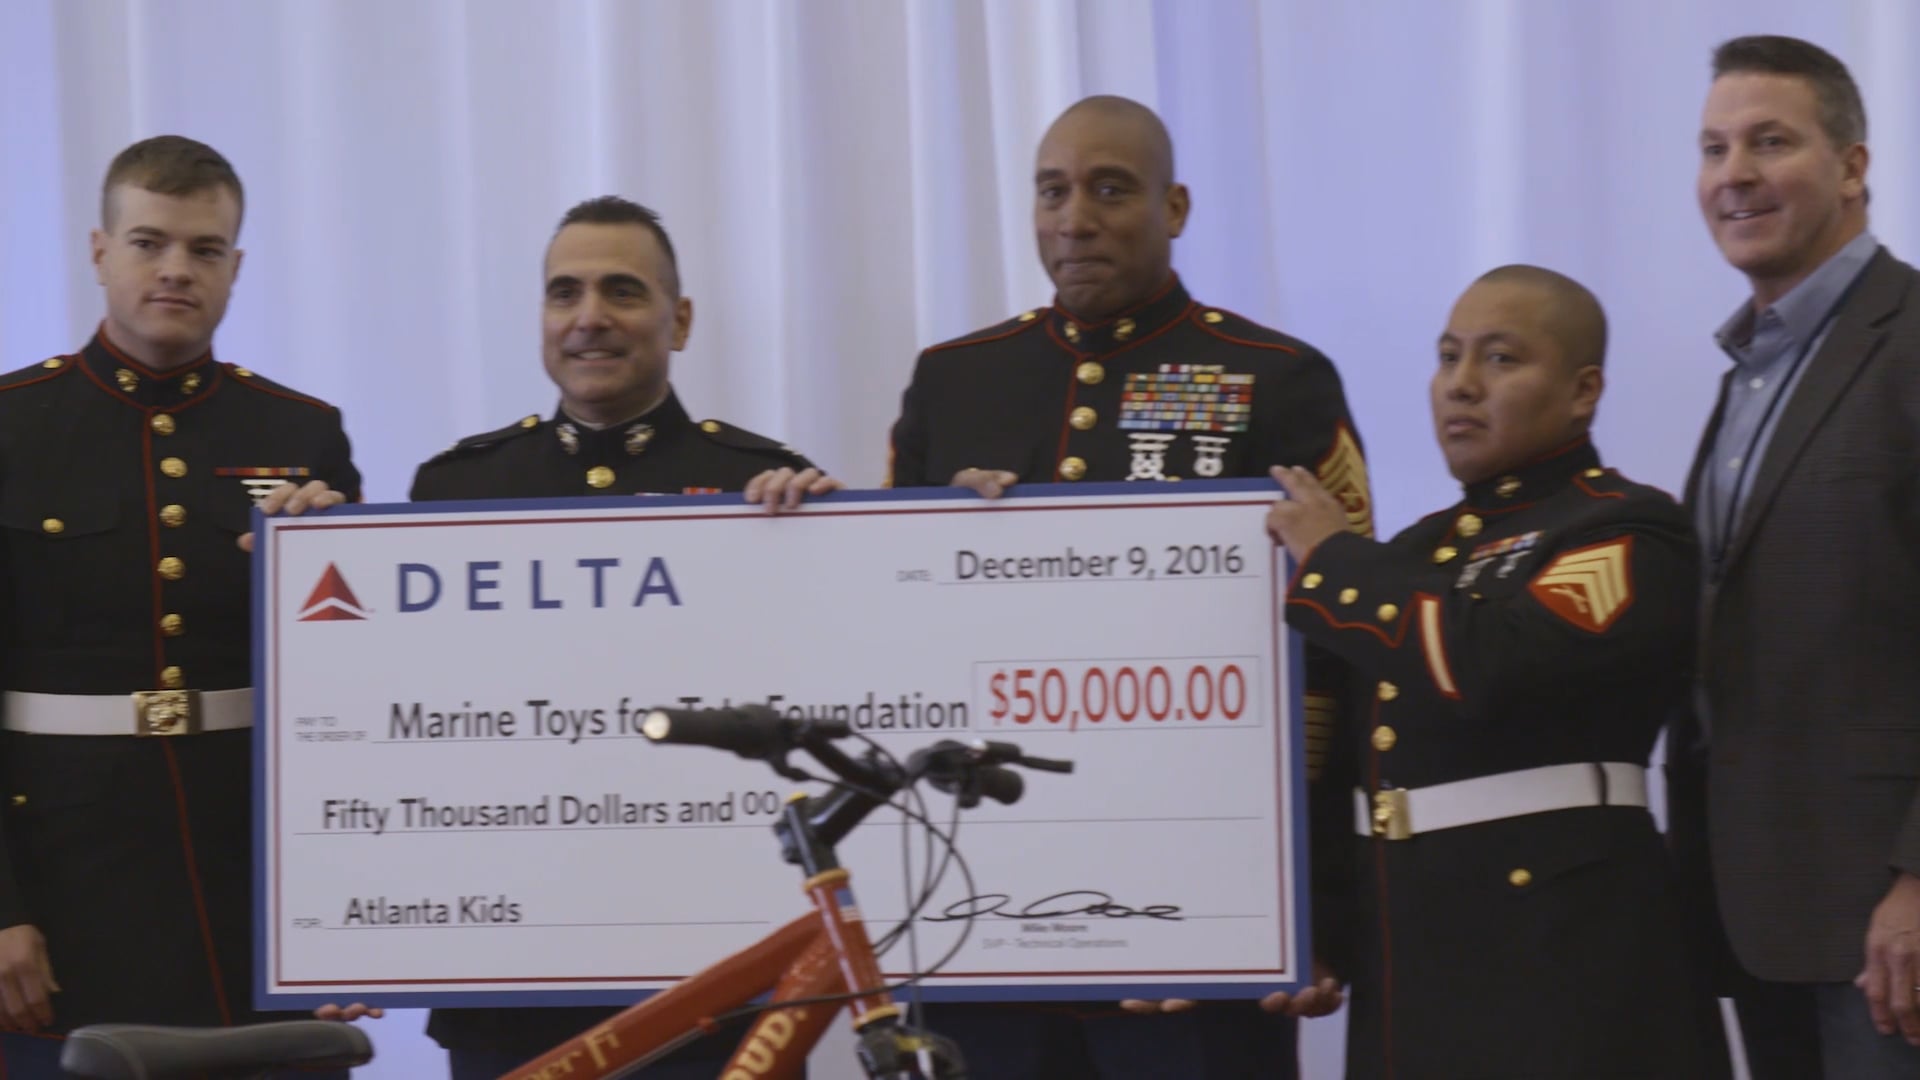 Delta:Toys For Tots (2016) Directed by Jose A. Acosta for Heards Creek.